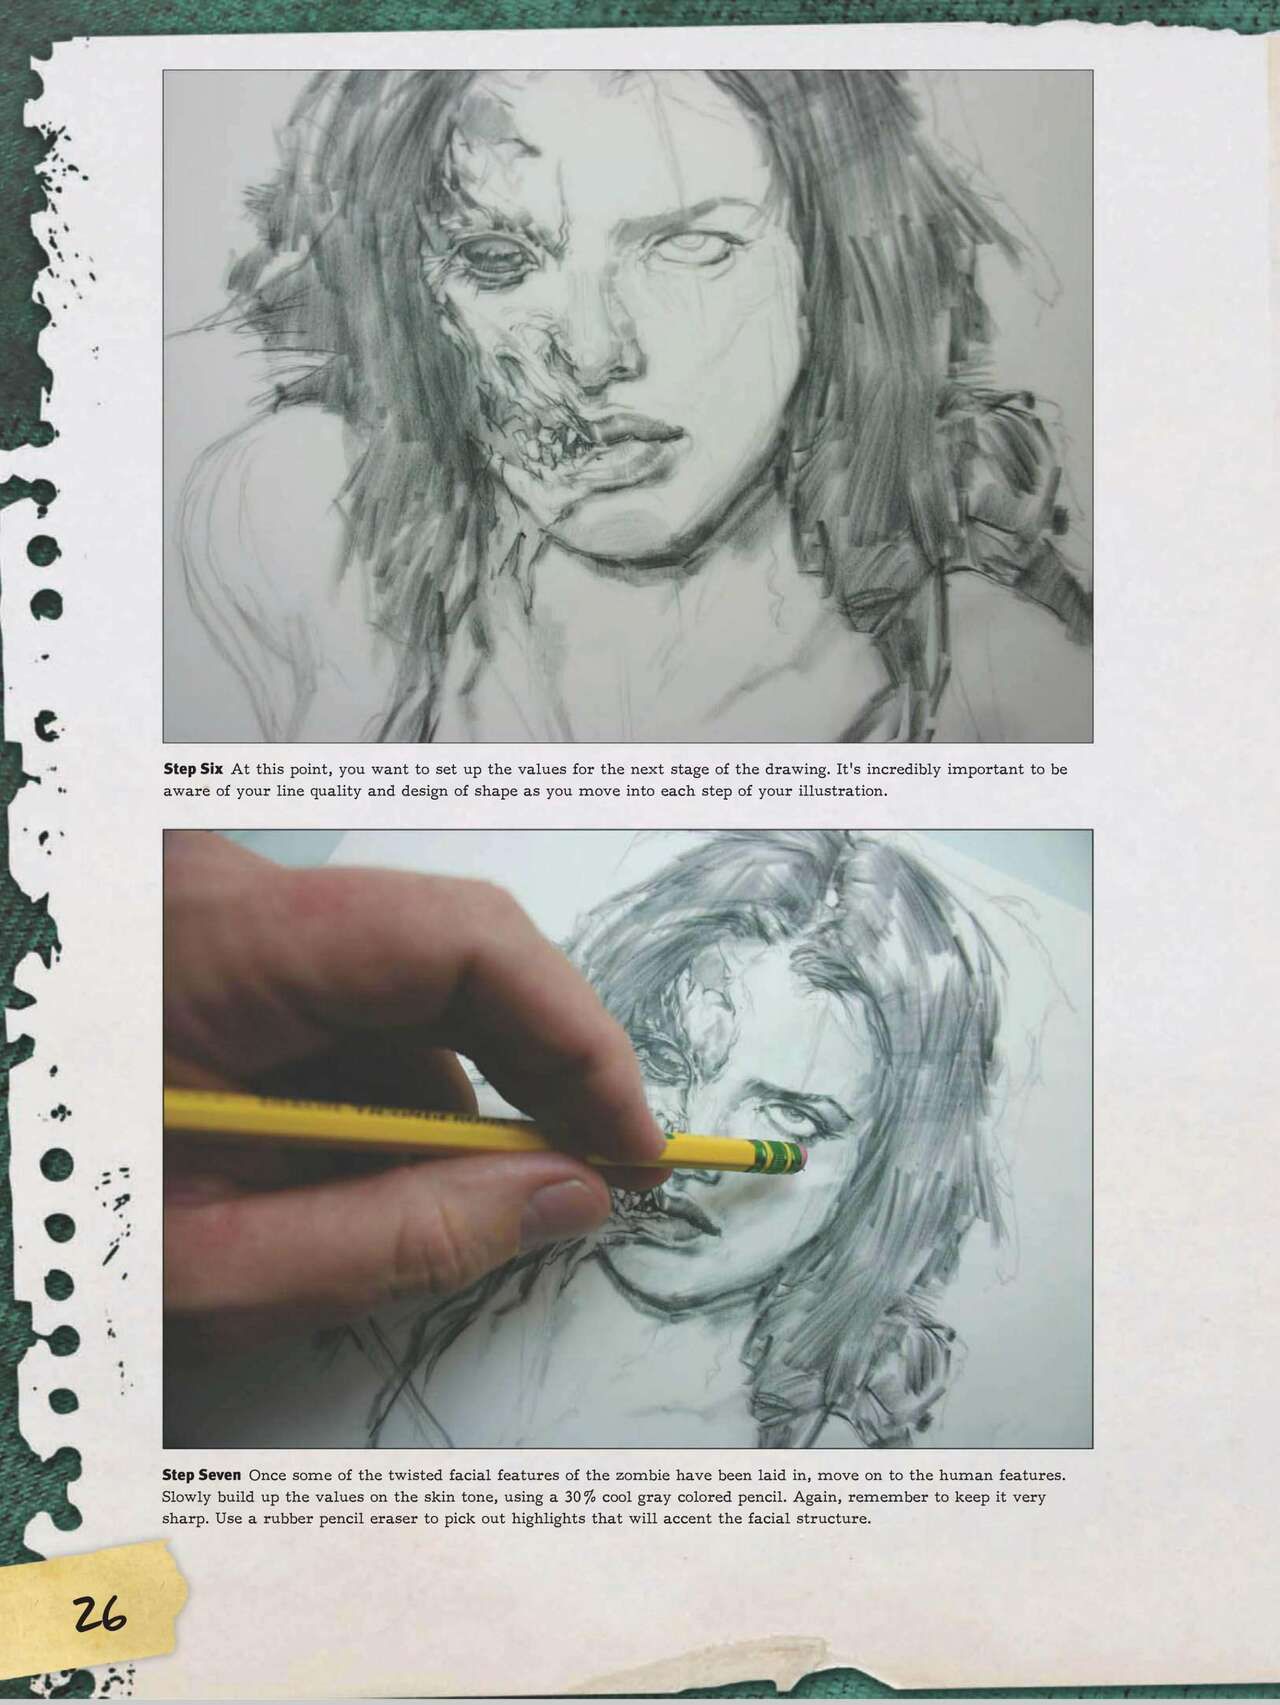 How to Draw Zombies: Discover the secrets to drawing, painting, and illustrating the undead 僵尸描绘集 27